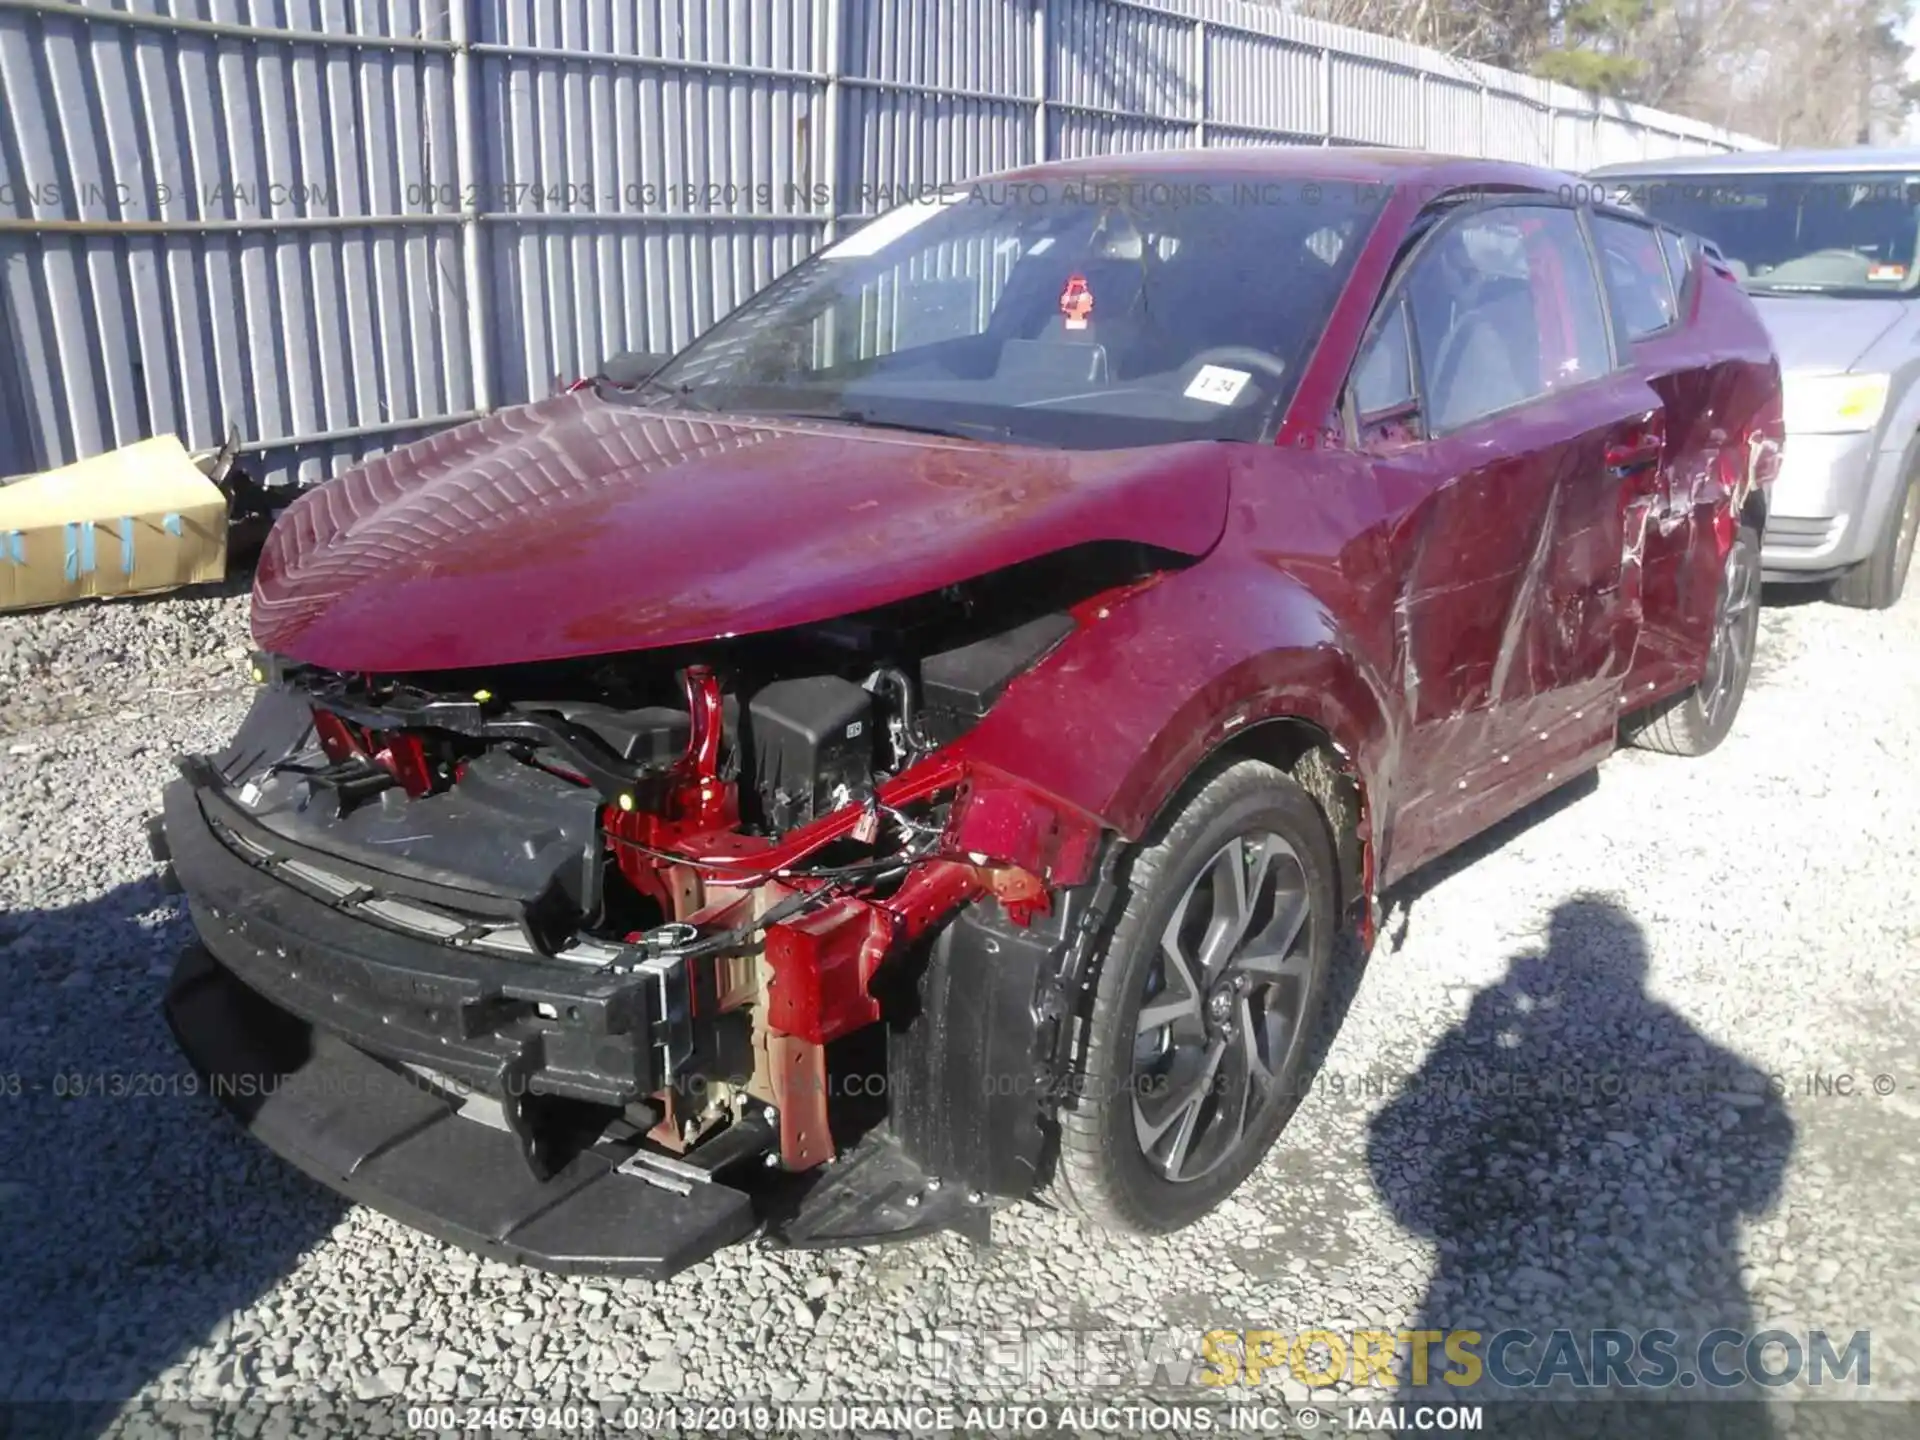 2 Photograph of a damaged car NMTKHMBXXKR081980 TOYOTA C-HR 2019